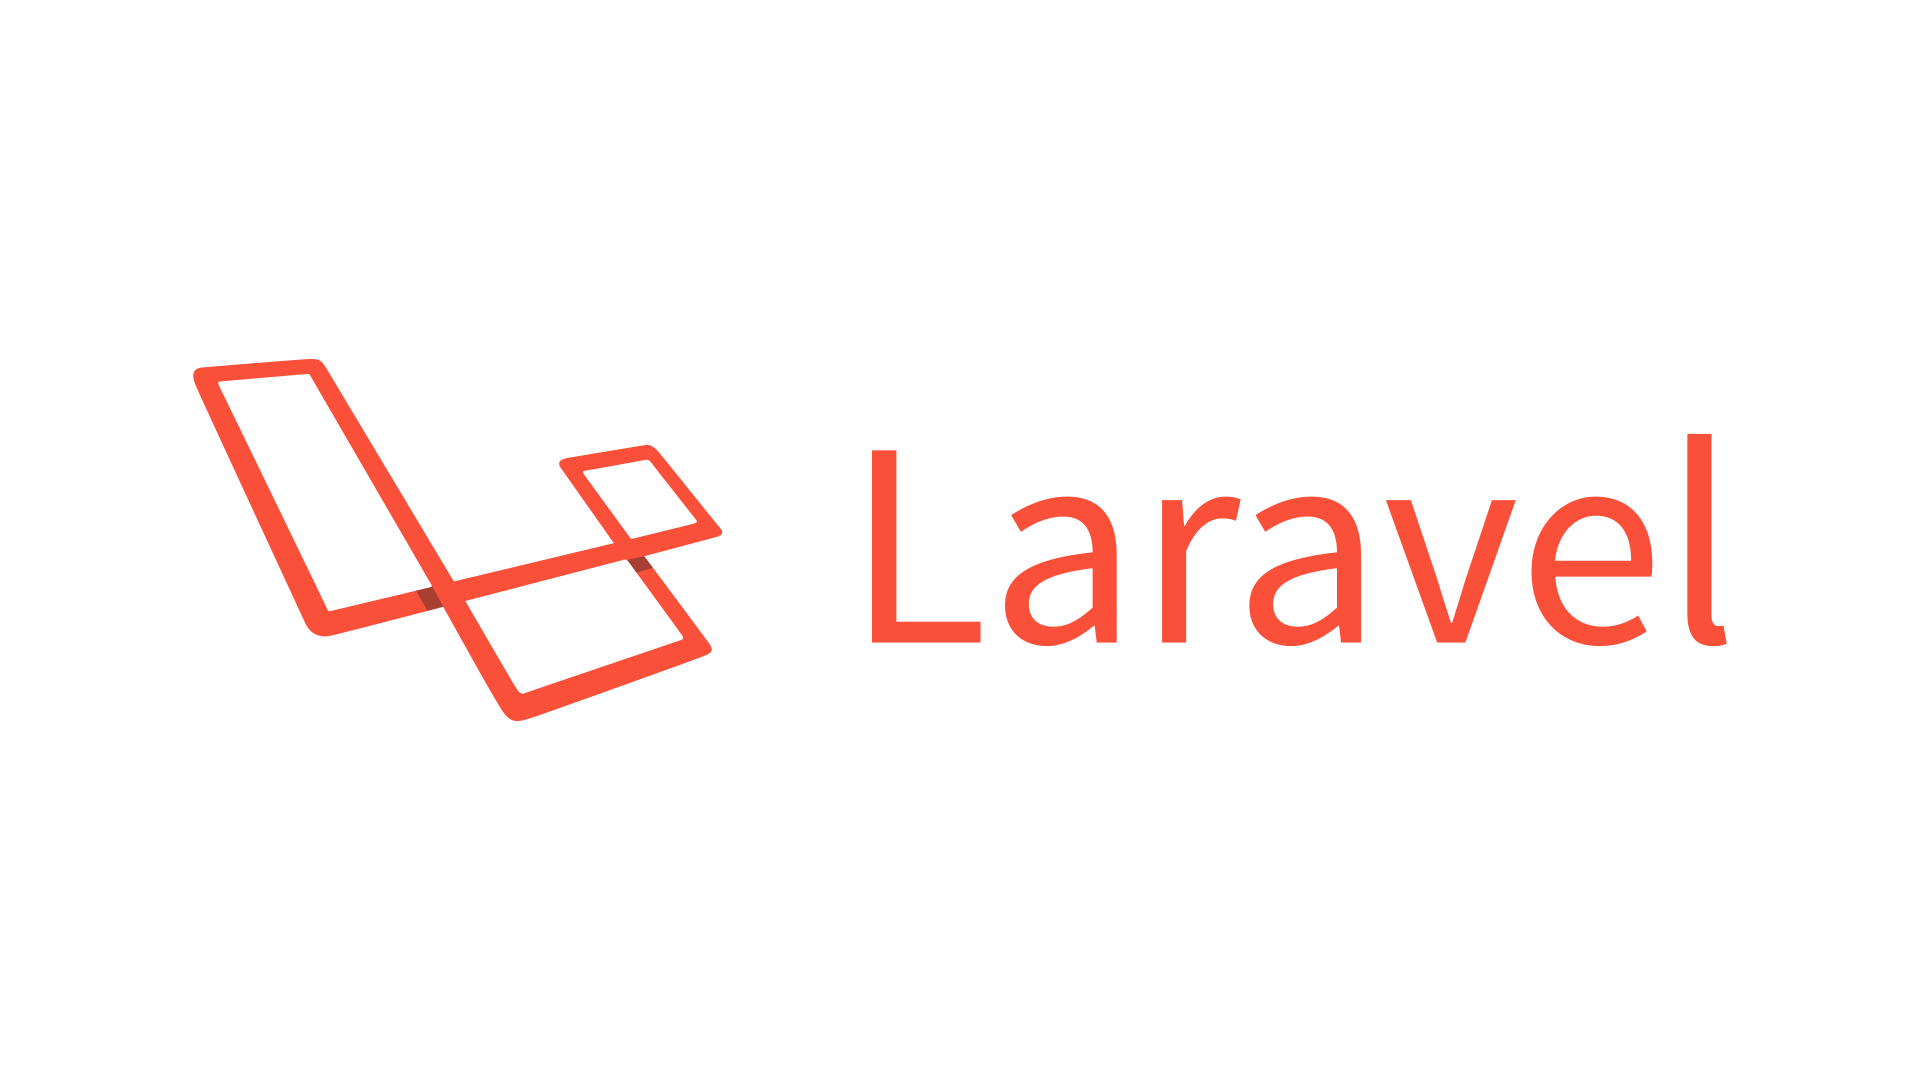 4 Laravel 5.5 Features I am looking forward to using